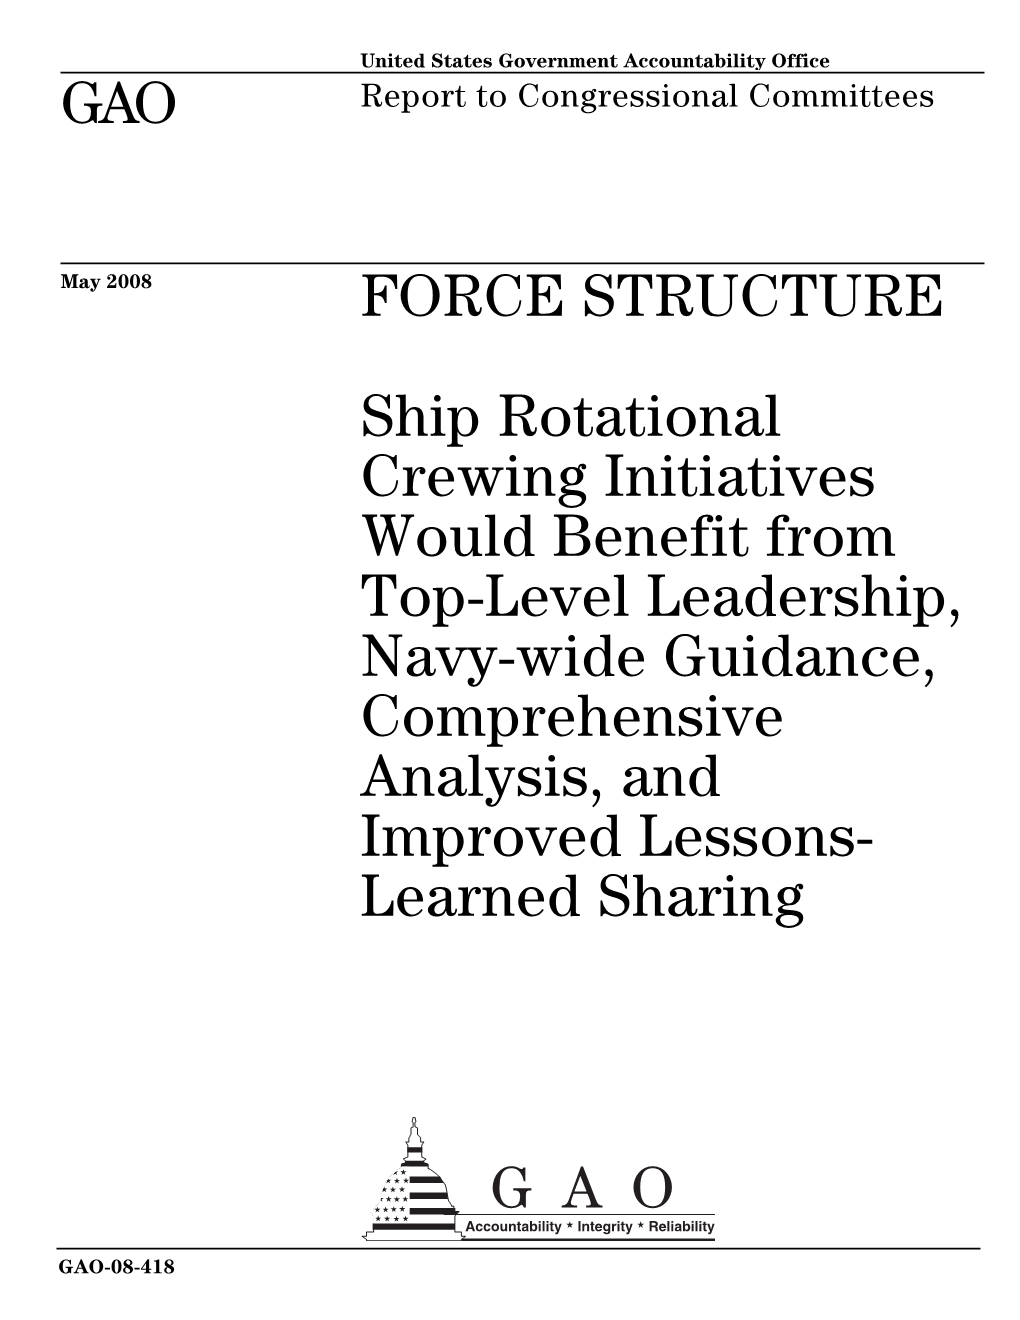 GAO-08-418 Force Structure: Ship Rotational Crewing Initiatives Would Benefit from Top-Level Leadership, Navy-Wide Guidance